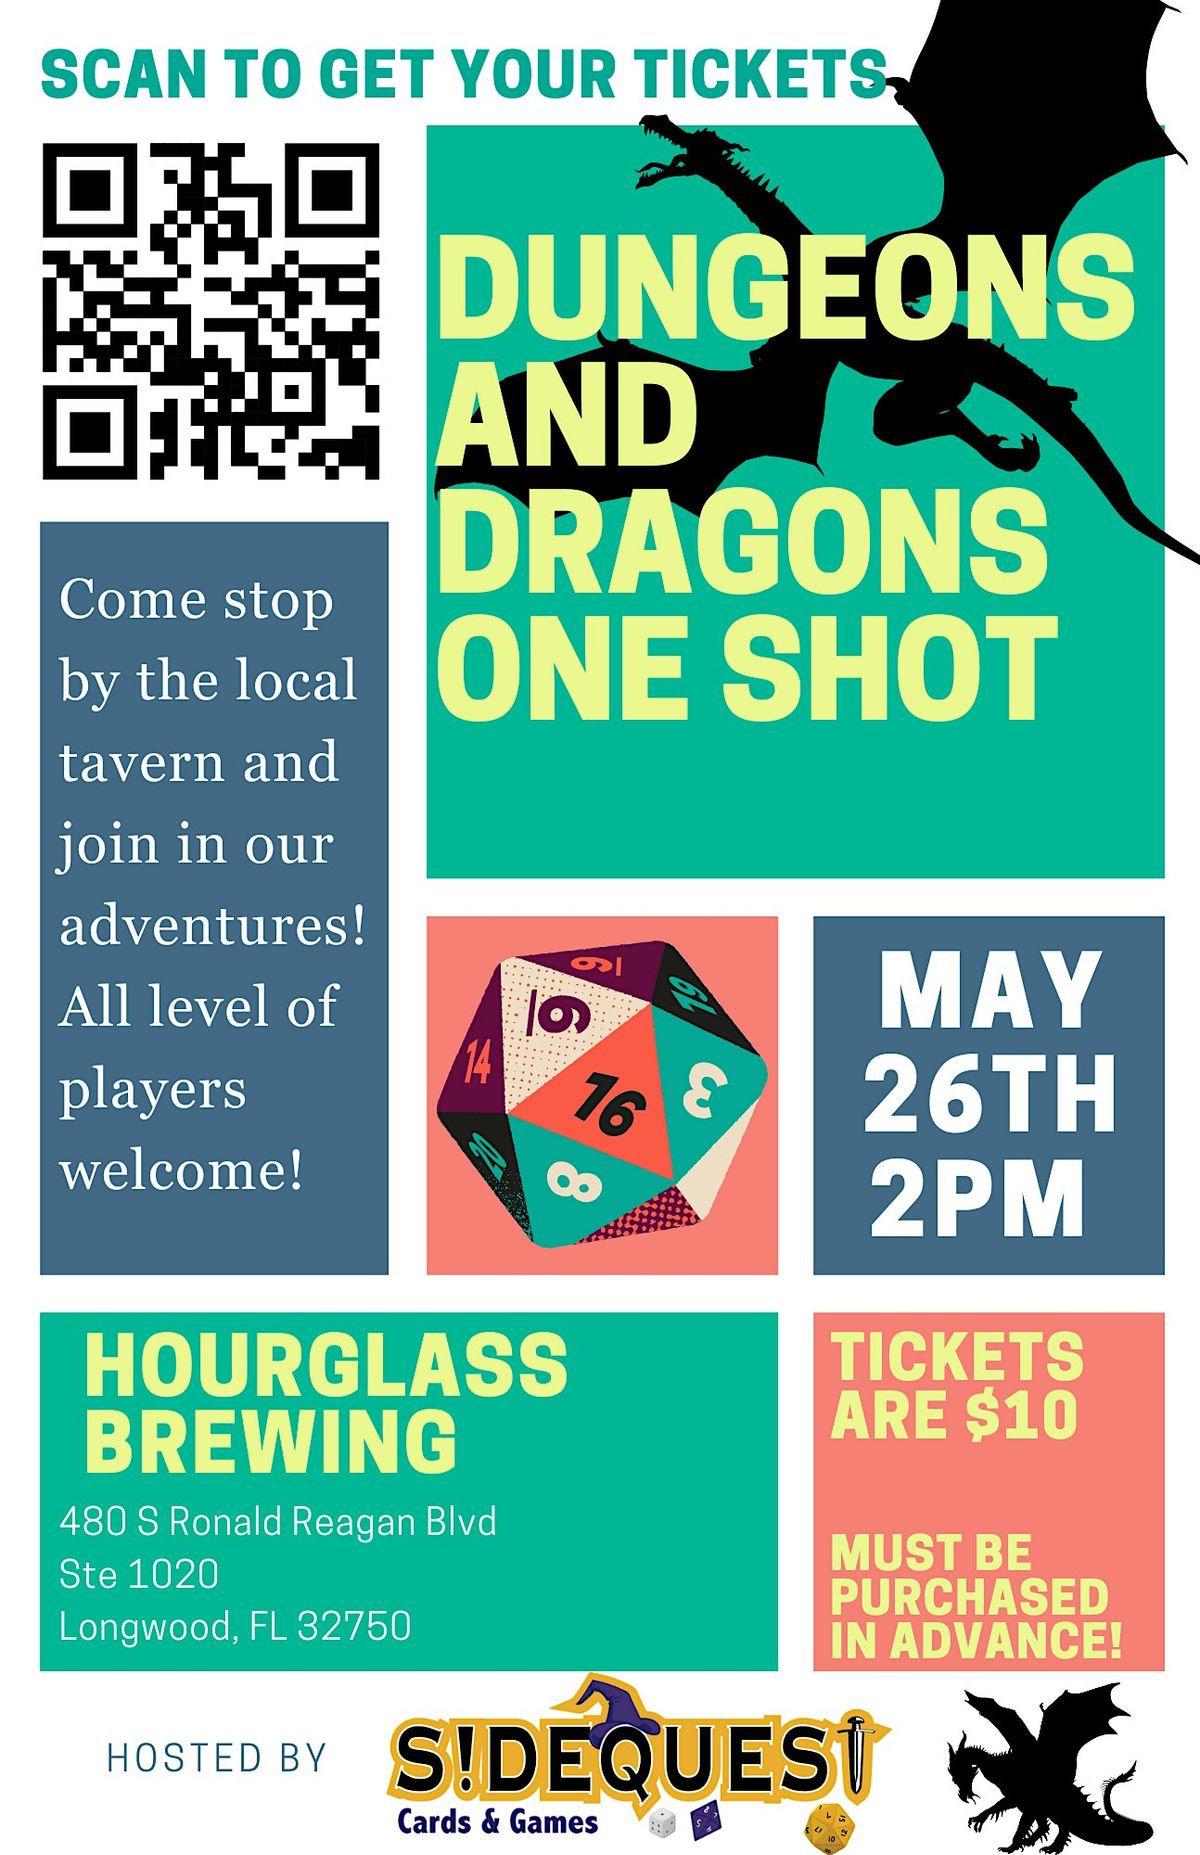 Dungeons And Dragons One Shot at Hourglass Brewing